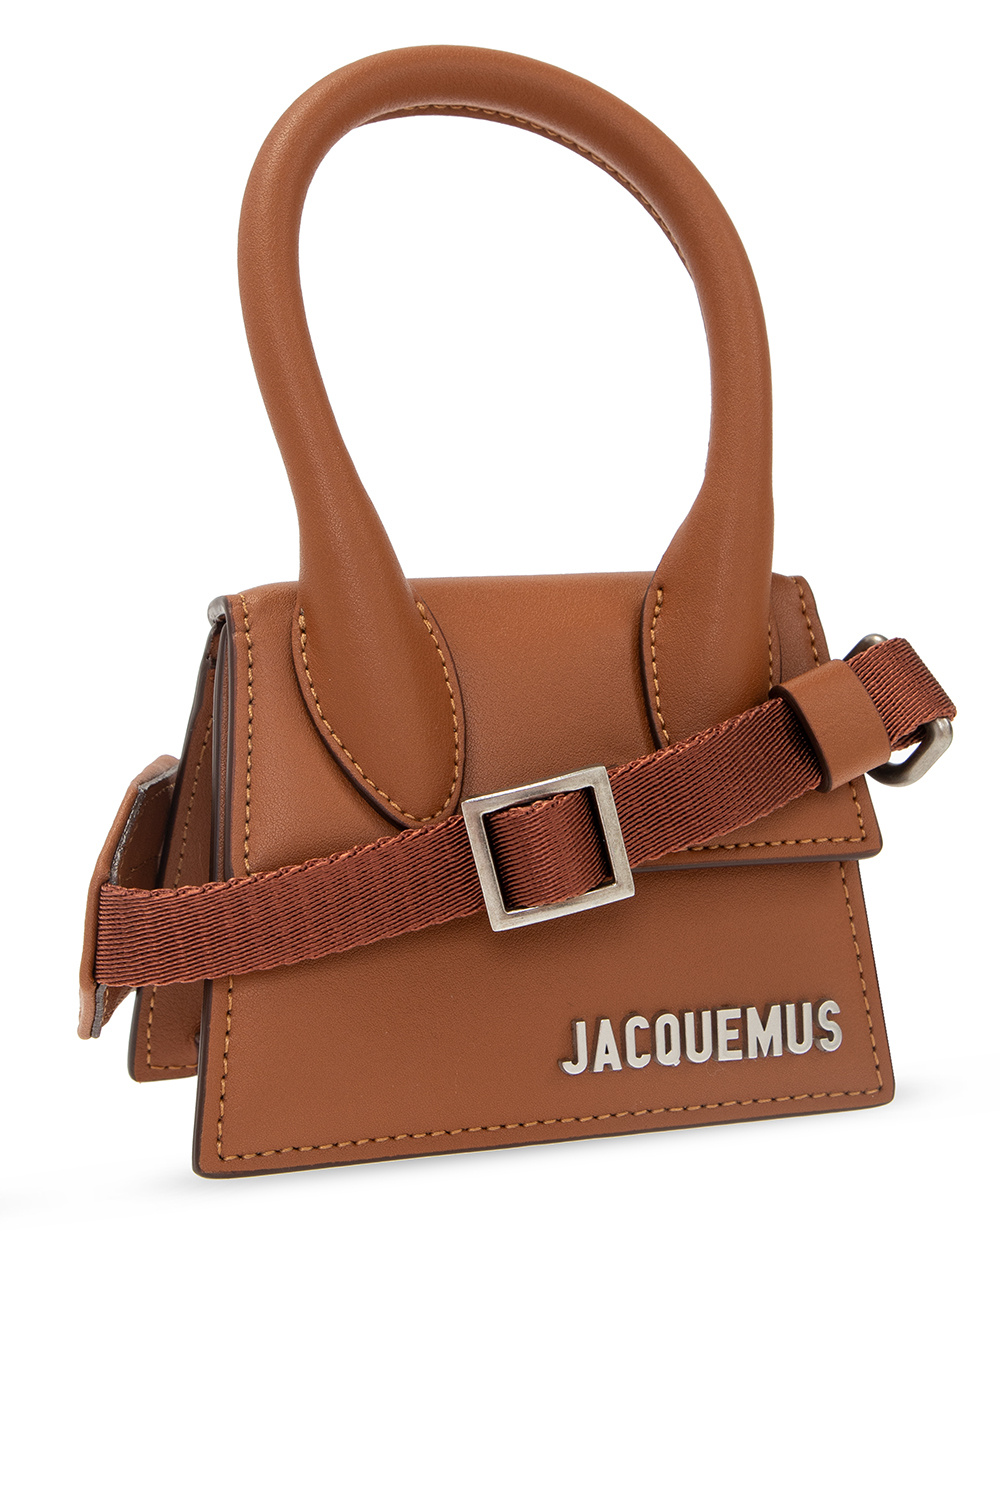 Le Chiquito Homme Leather Bag in Black - Jacquemus